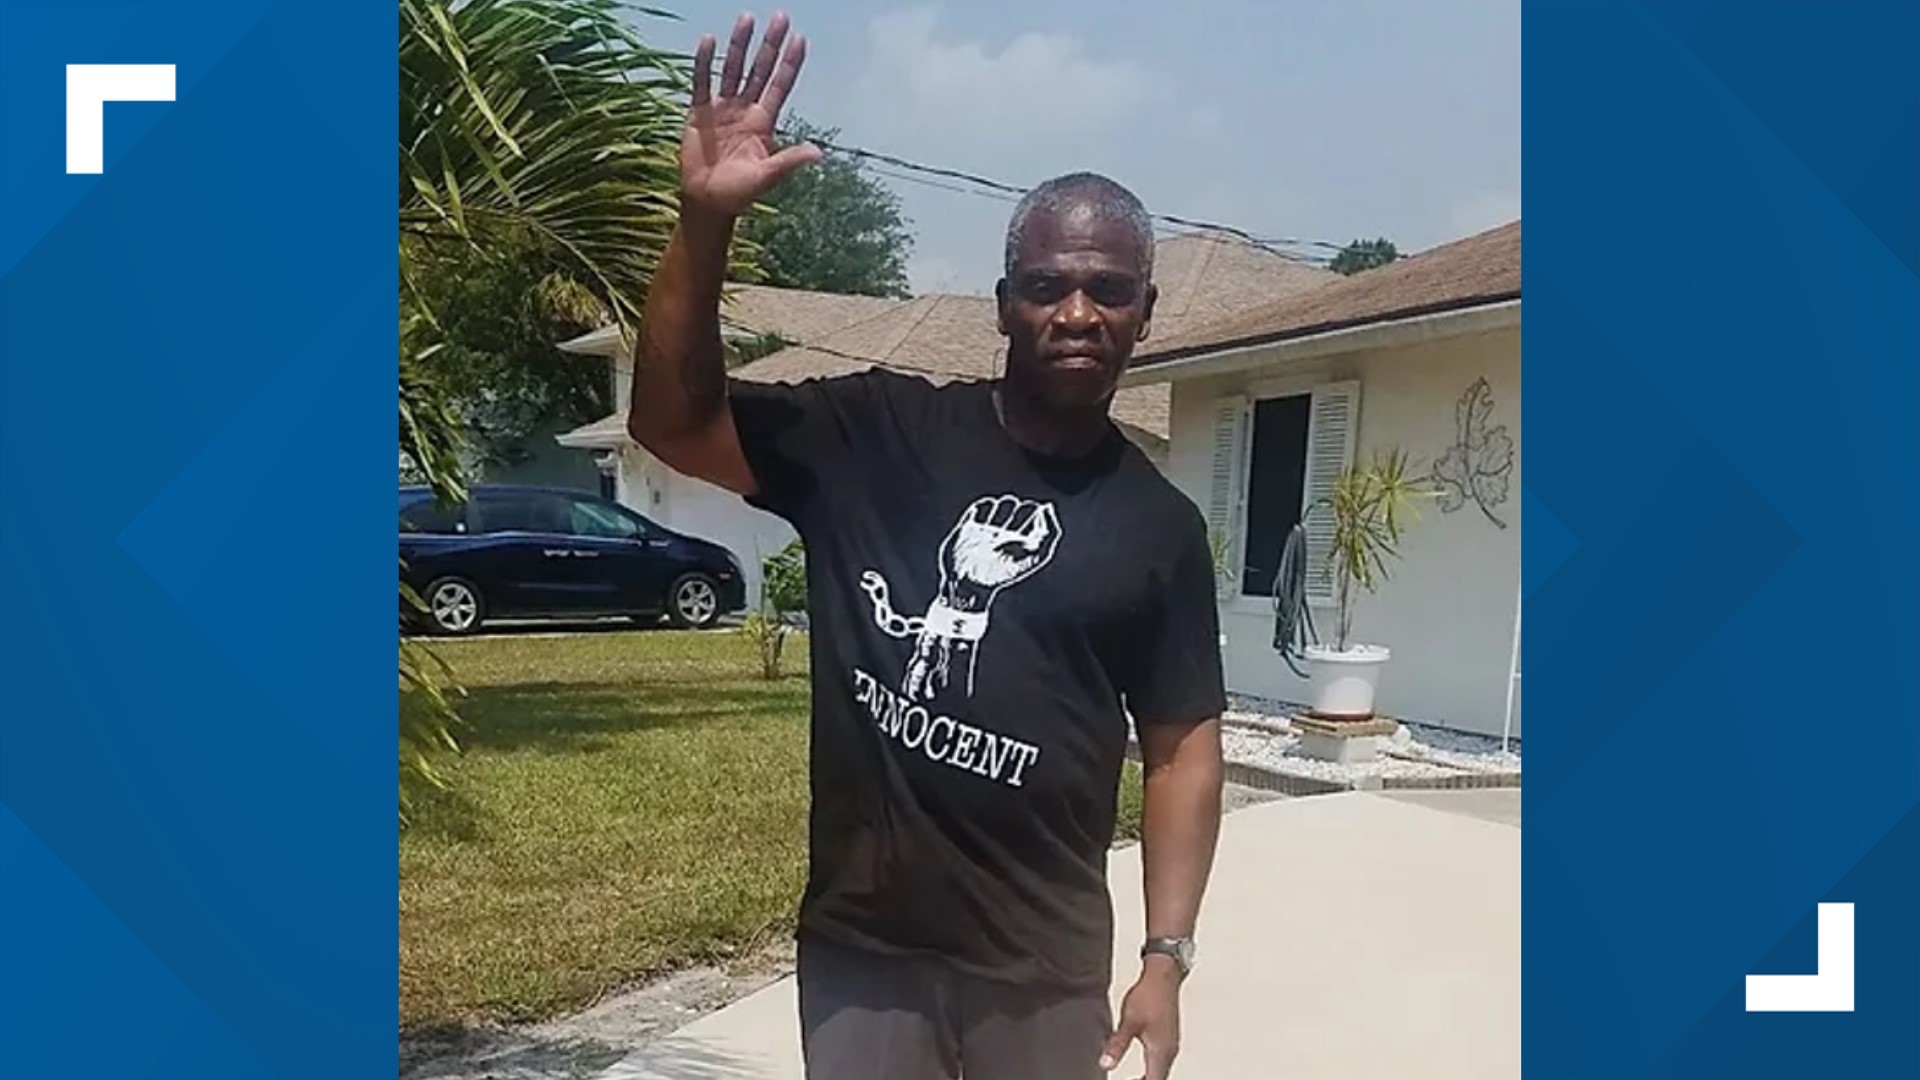 Leonard Cure, 53, was wrongfully convicted for armed robbery in 2003. He was exonerated in 2020, and had received compensation by the State of Florida in August.